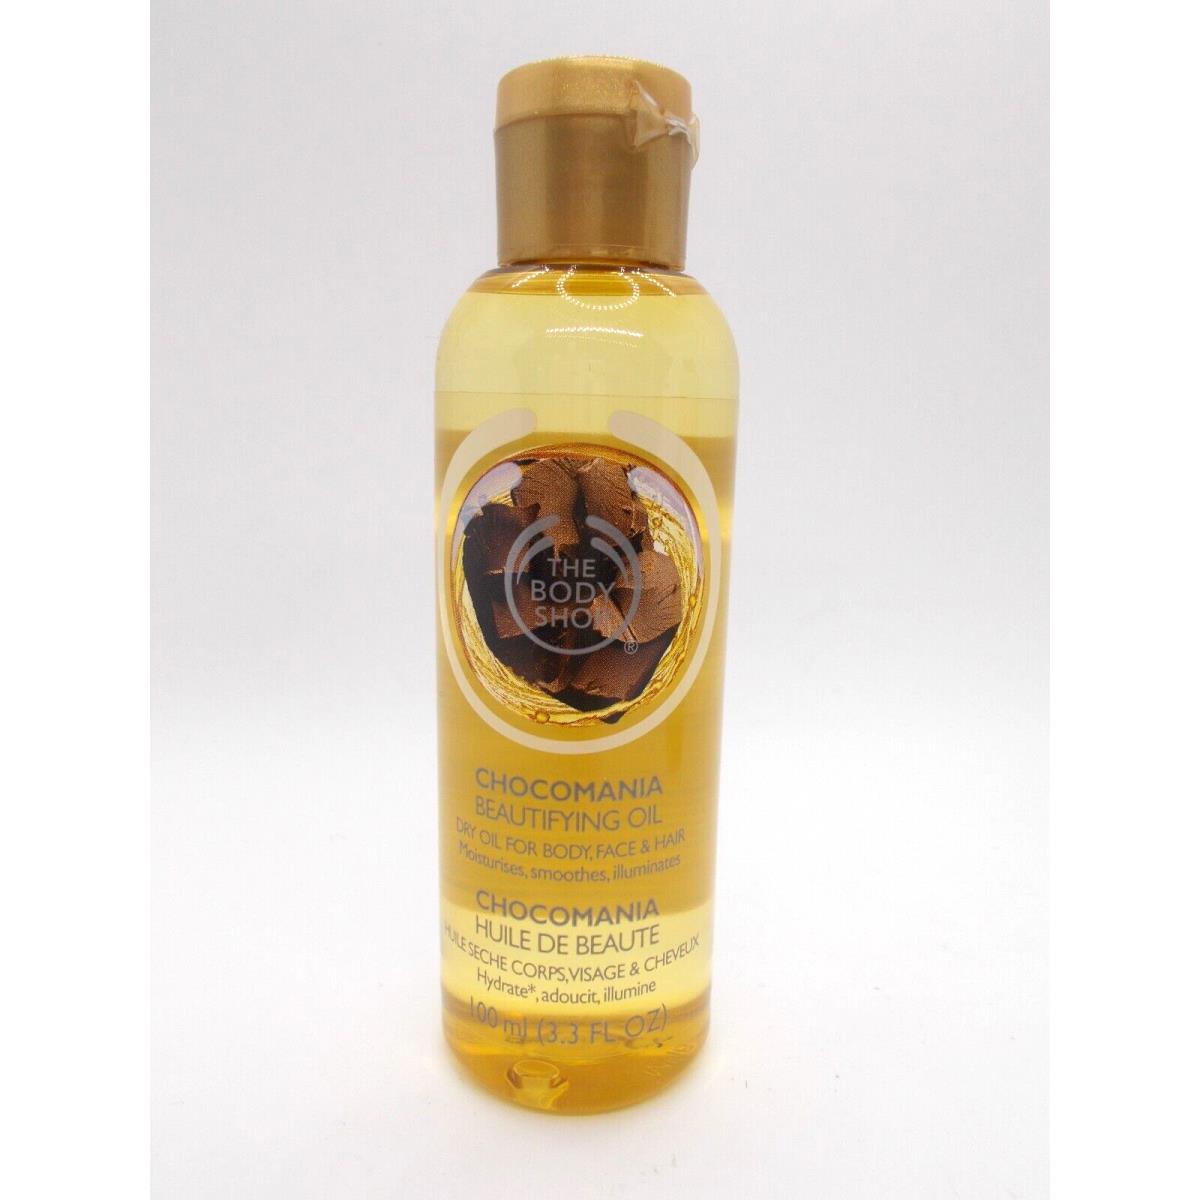 The Body Shop Chocomania Beautifying Dry Oil 3.3 Ounce Bottle